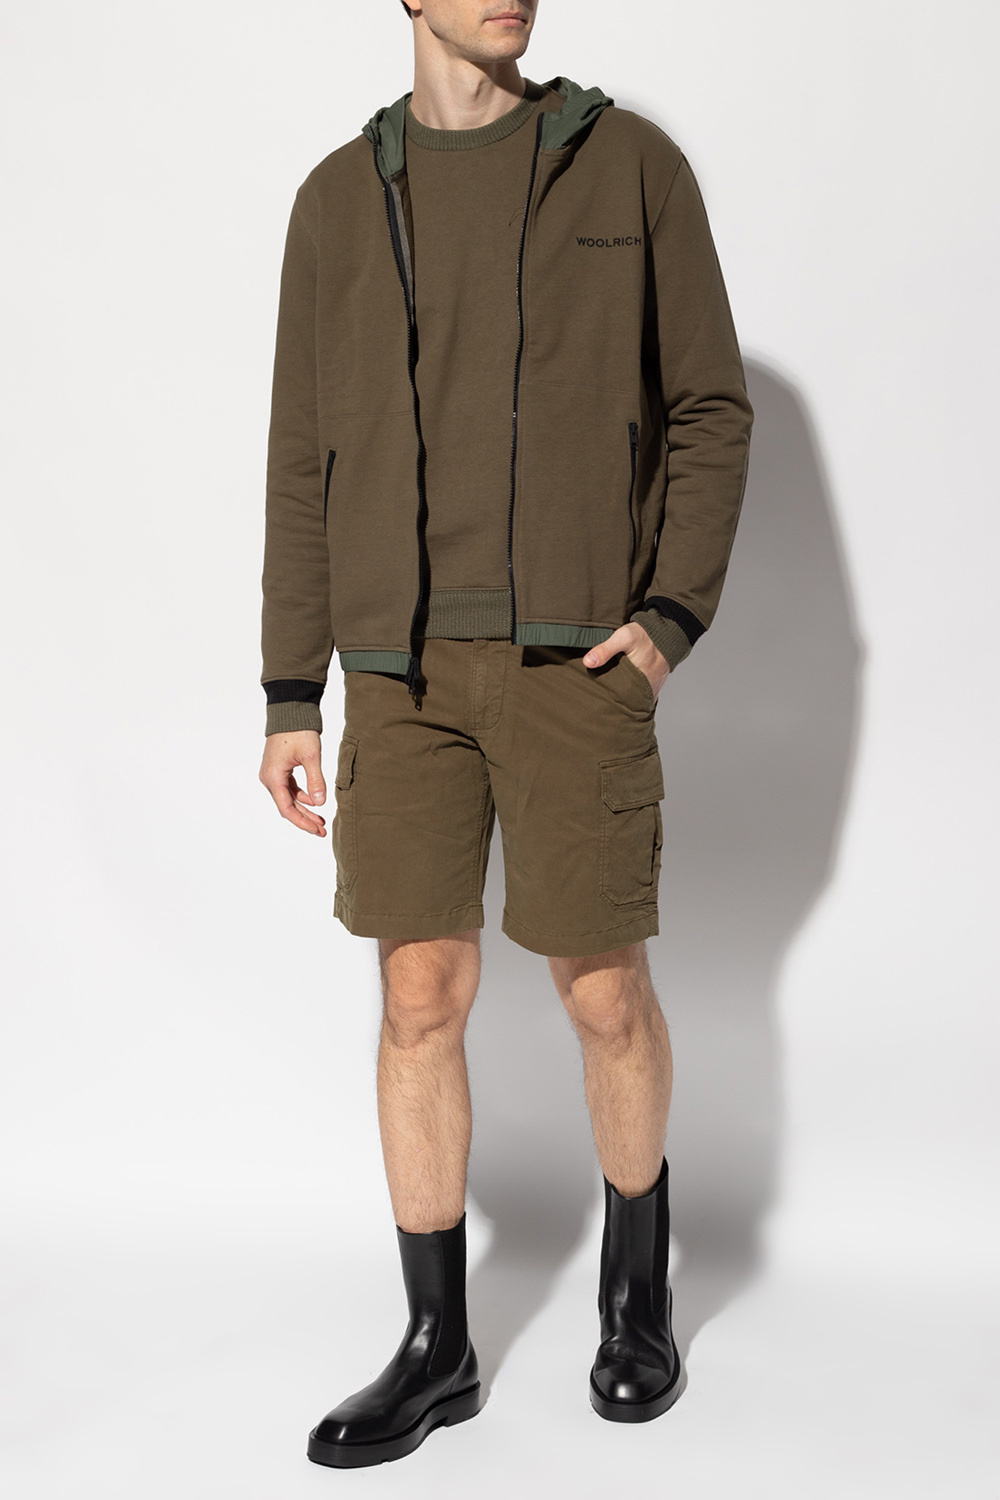 Woolrich Shorts with pockets